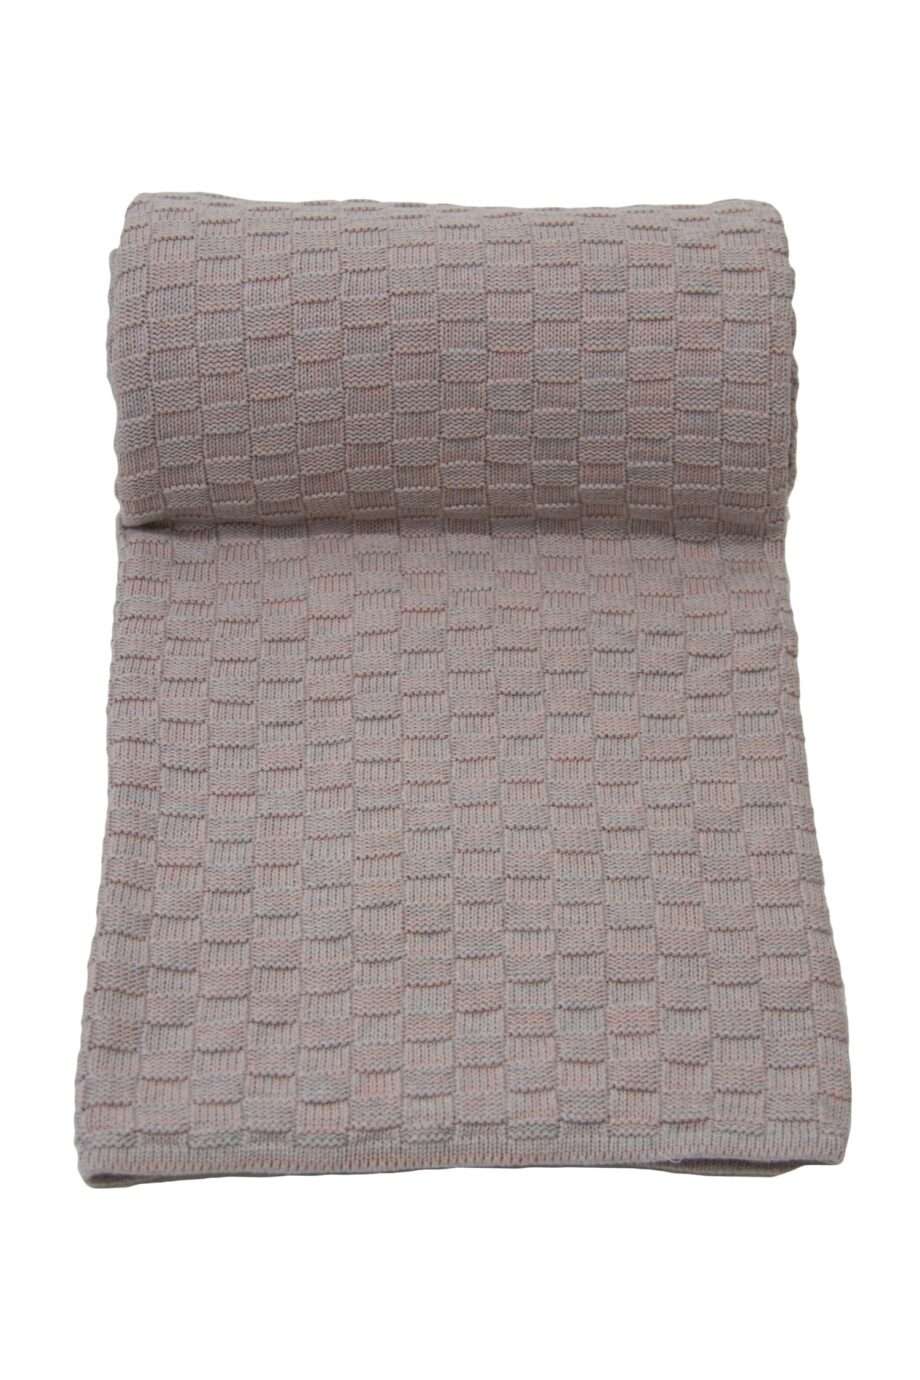 drops mêlée powder rose knitted cotton throw large